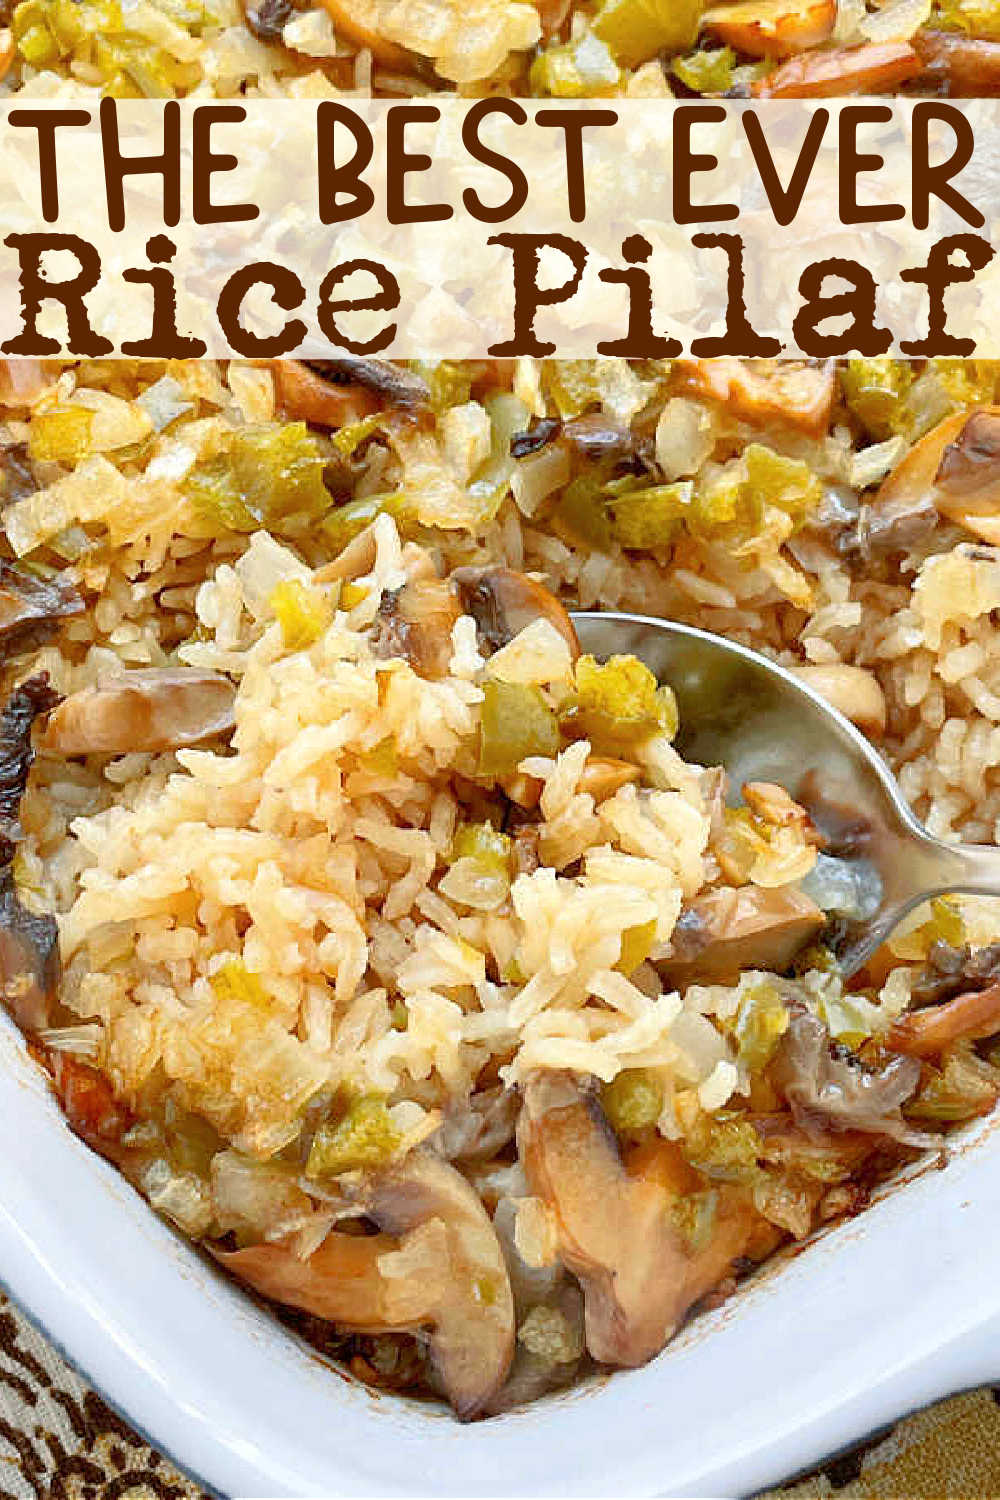 Why is this the best rice pilaf? Because it is my Mom's recipe. White rice cooks to perfection in the oven with just a few surprising ingredients. via @foodtasticmom